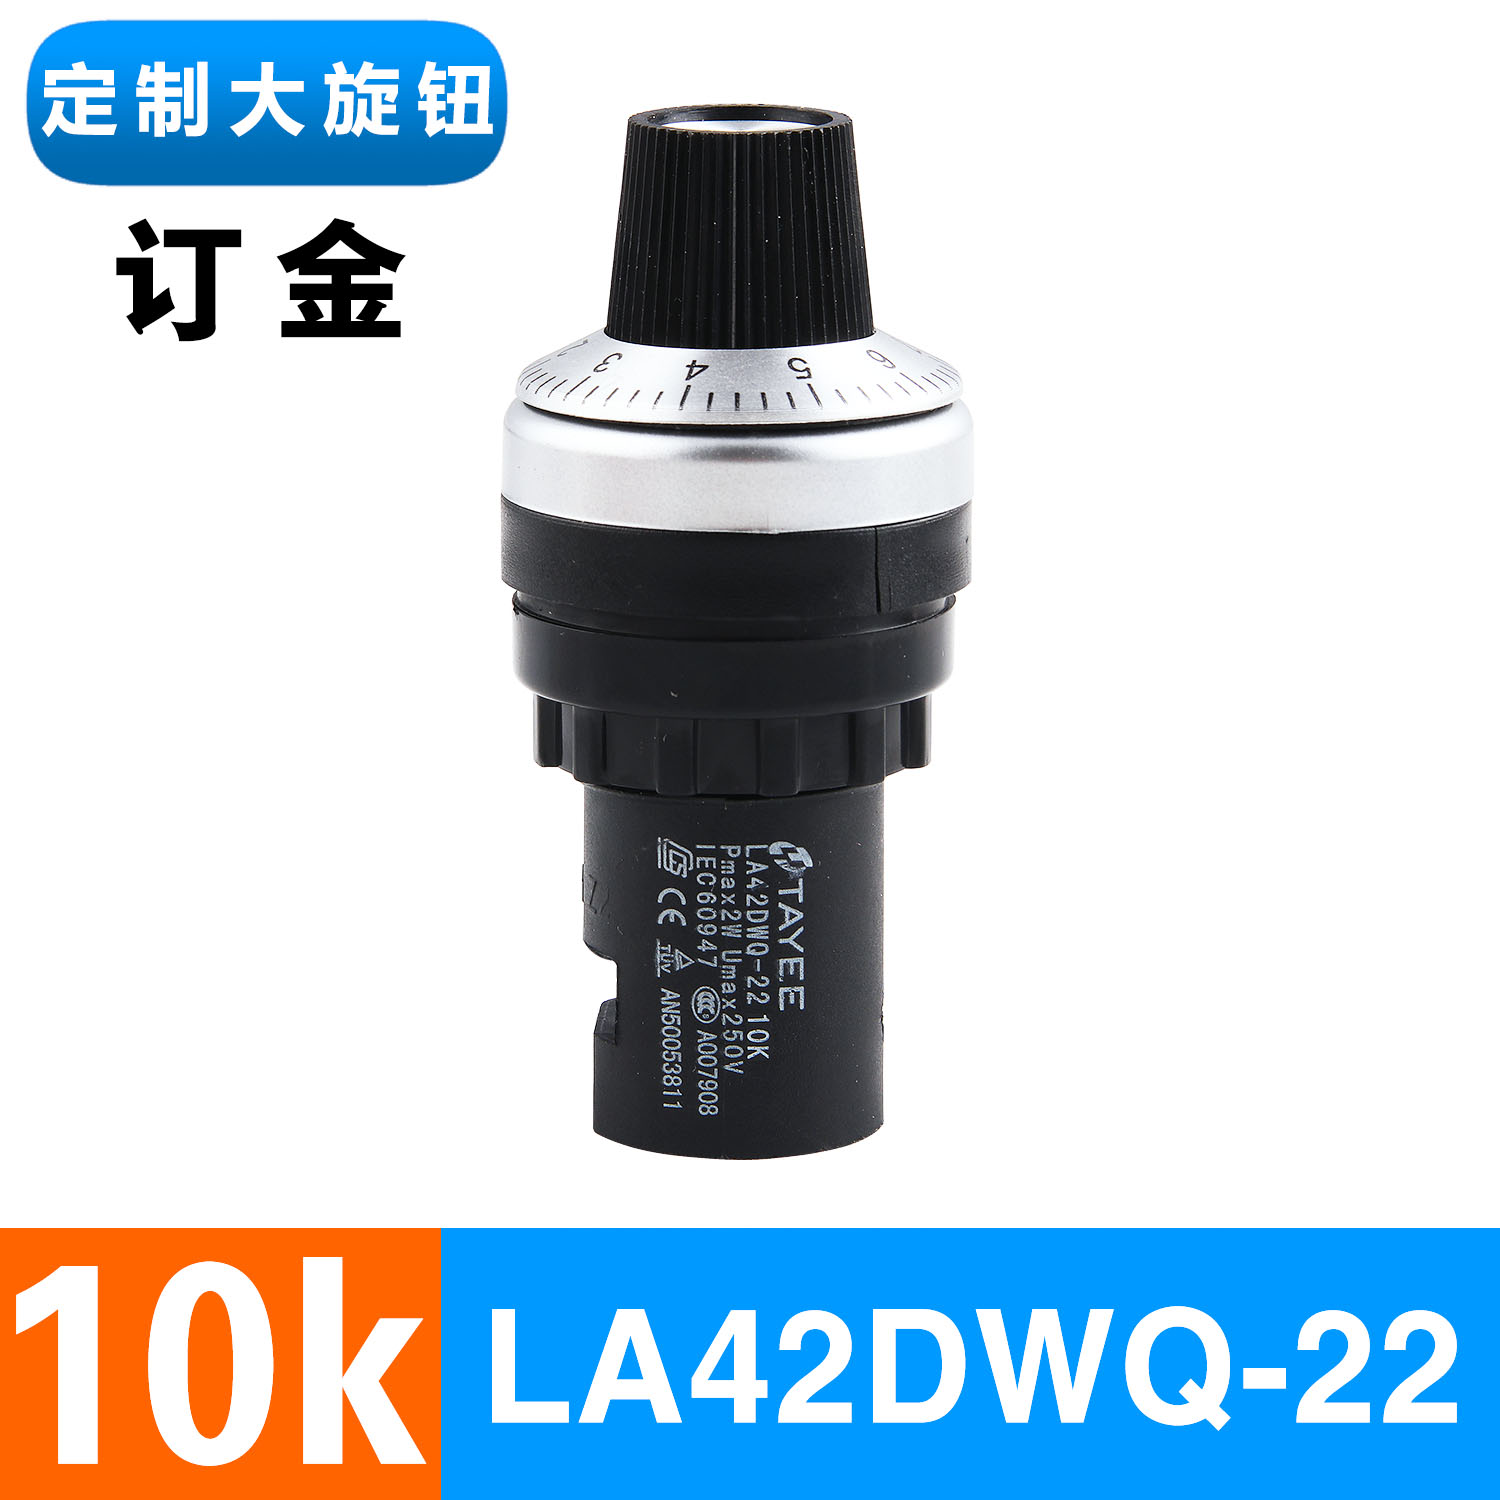 Custom Button 10Kquality goods Shanghai Tianyi Frequency converter adjust speed potentiometer precise LA42DWQ-22 governor 22mm5K10K